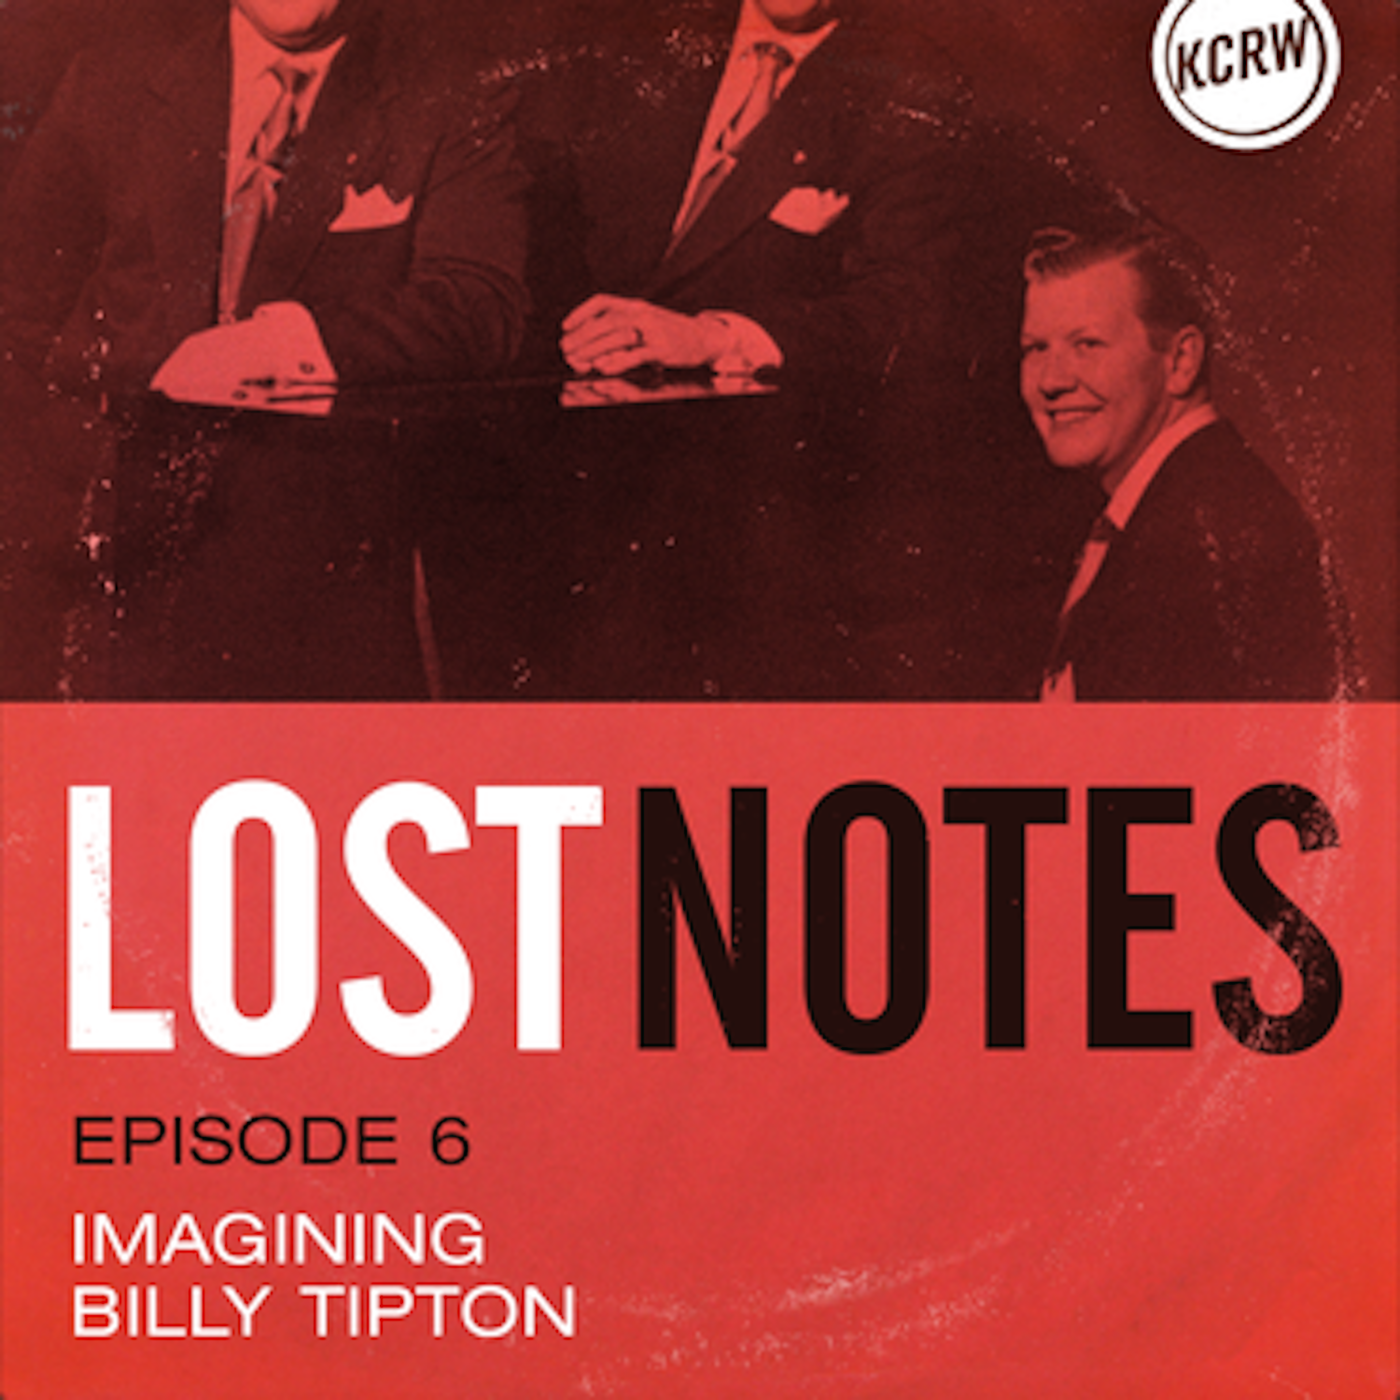 Lost Notes S2 Ep. 6: Imagining Billy Tipton